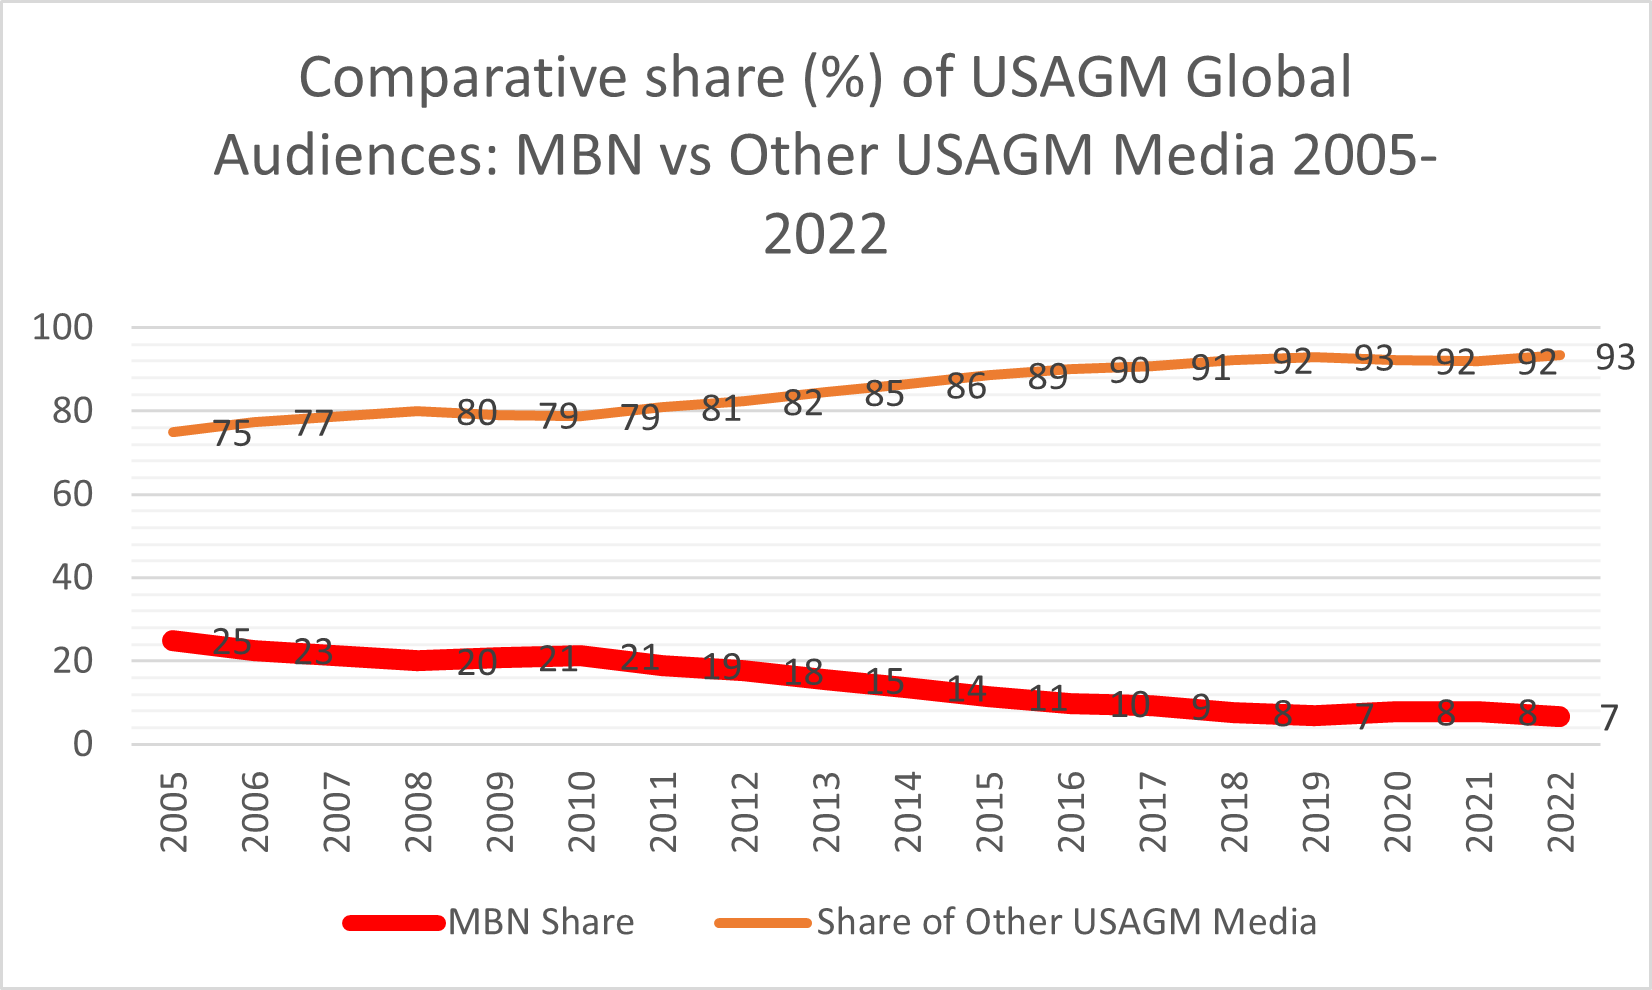 Comparative share (%) of USAGM Global Audiences: MBN vs Other USAGM Media, 2005-2022